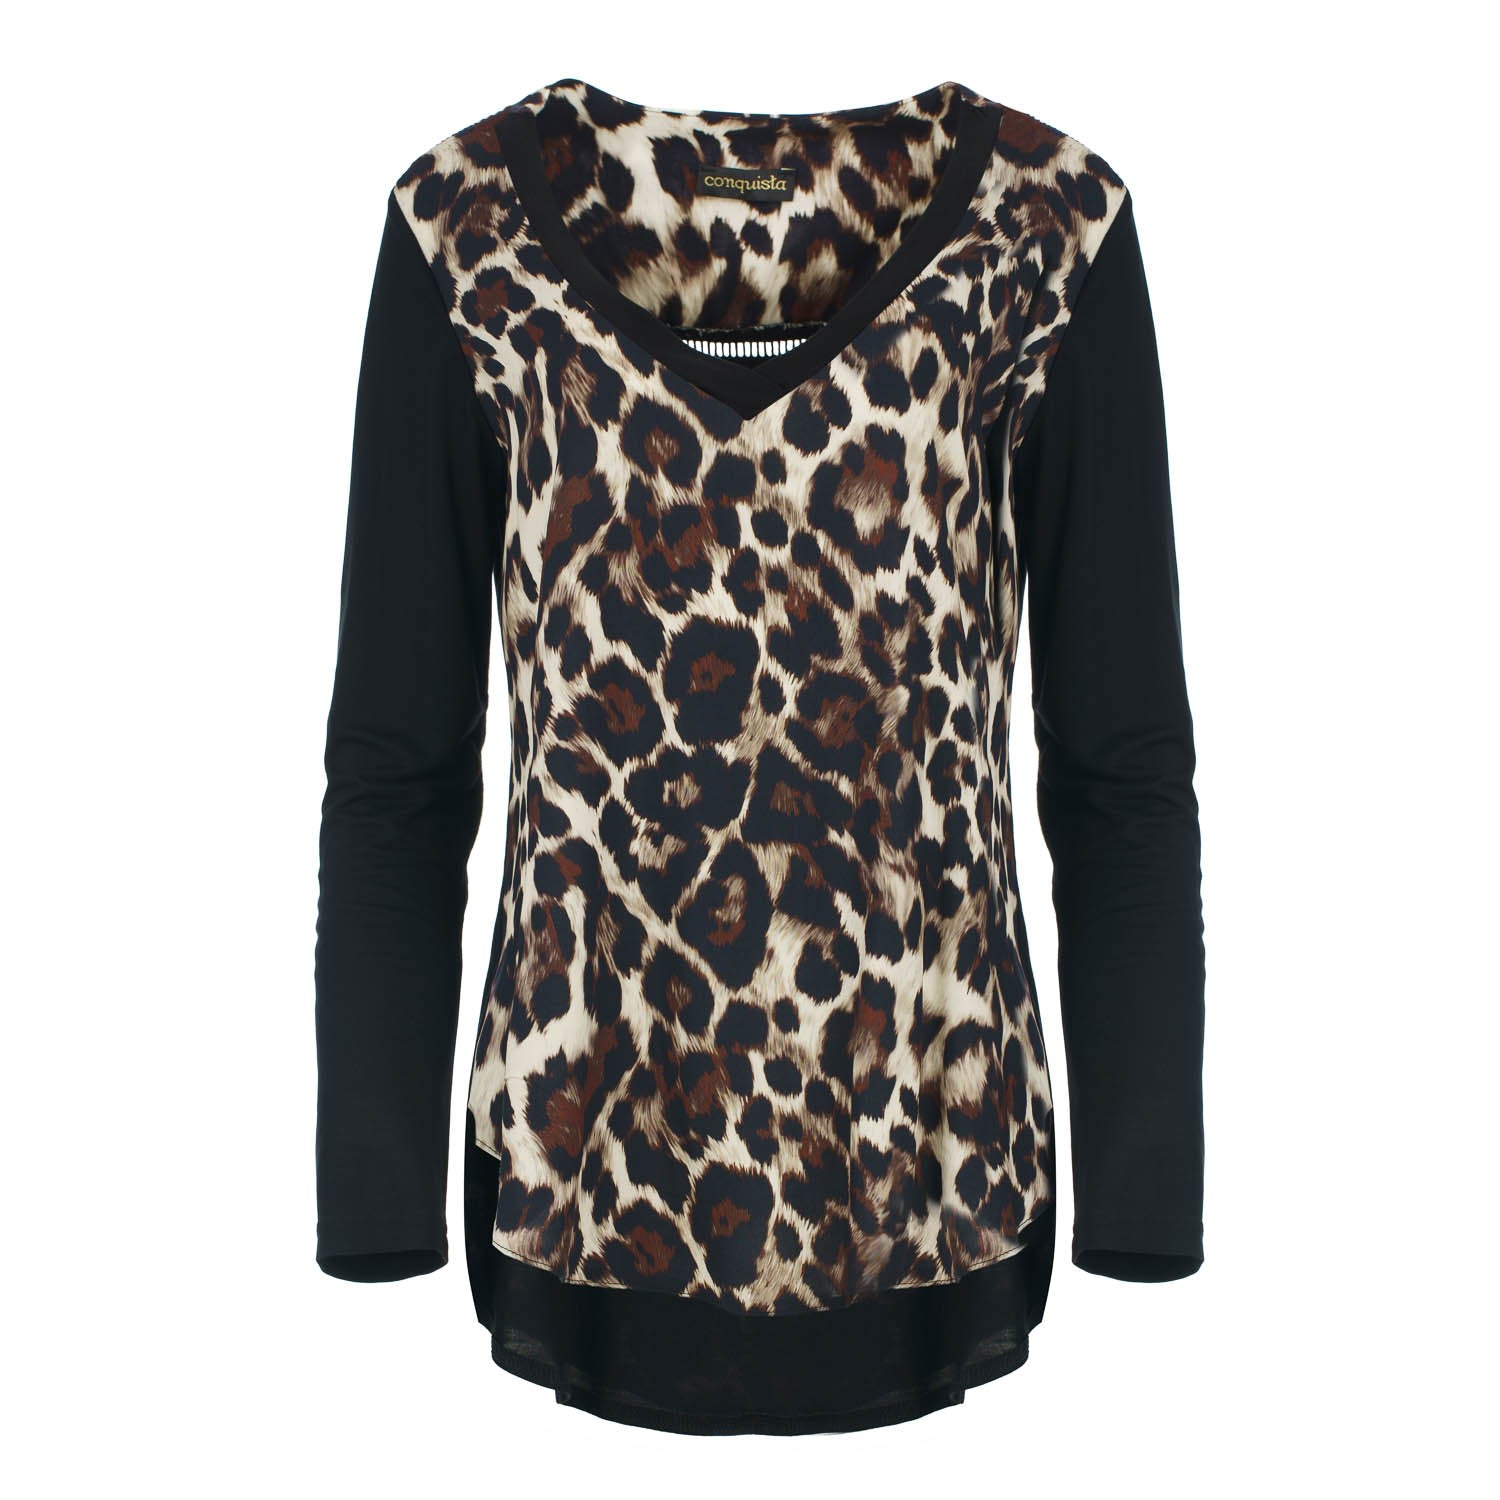 Conquista Women's Black Chic Animal Print Top With Tencel Jersey Back